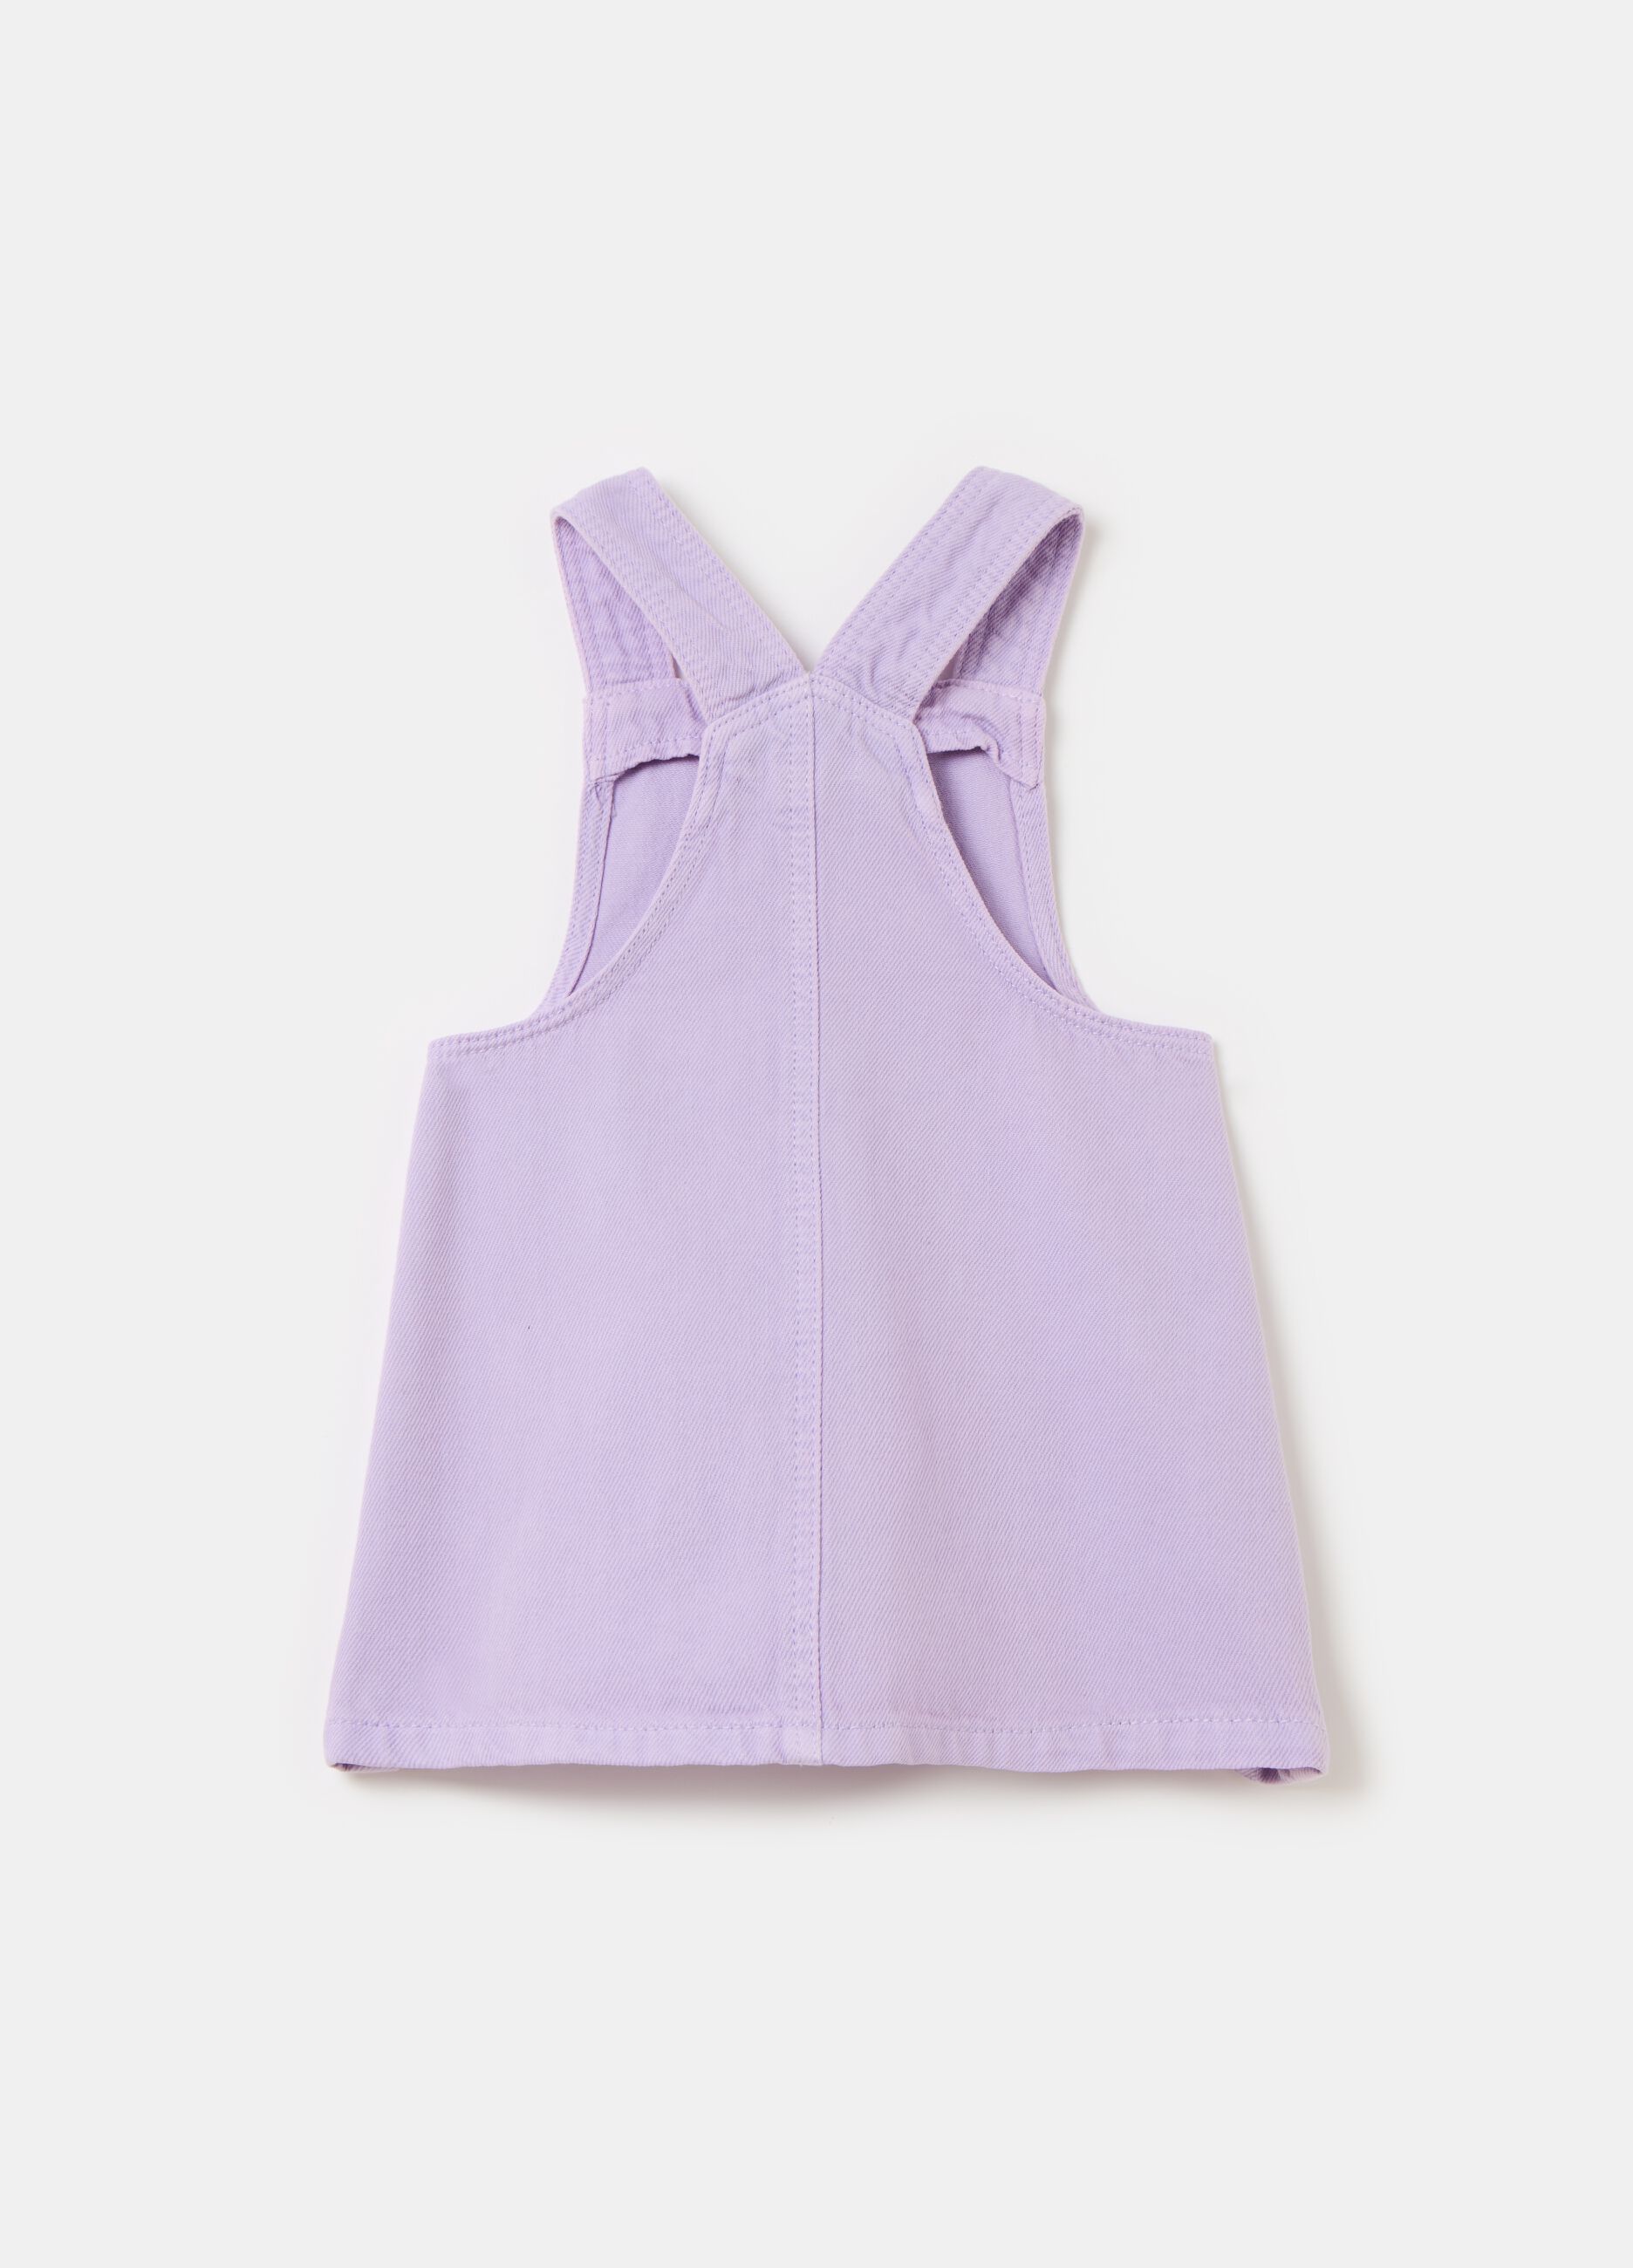 Denim pinafore with pockets